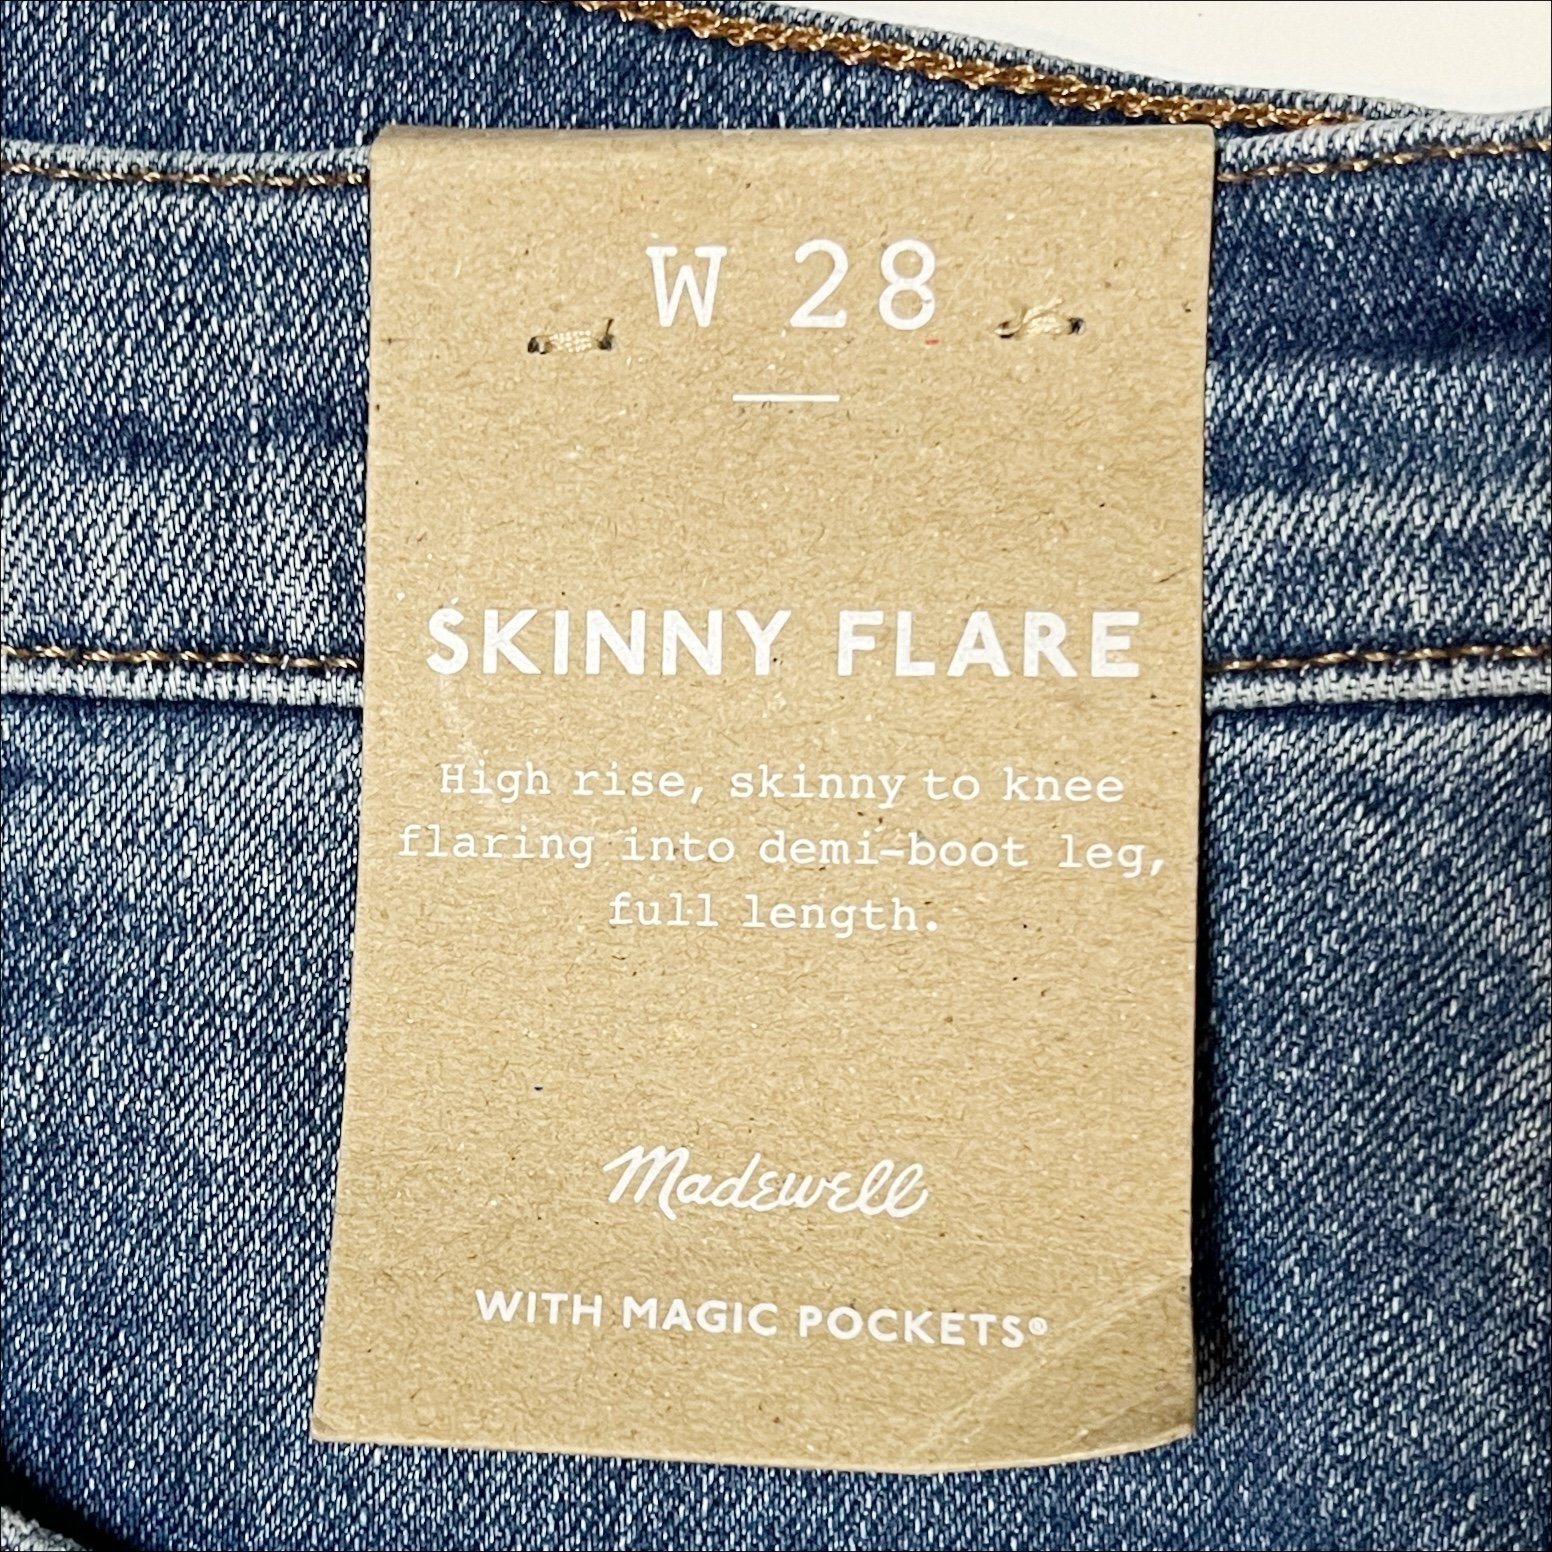 Authentic Madewell NWT Skinny Flare Jeans 28 6 high rise waist stretch retro faded blue MtfNzl0yl online store